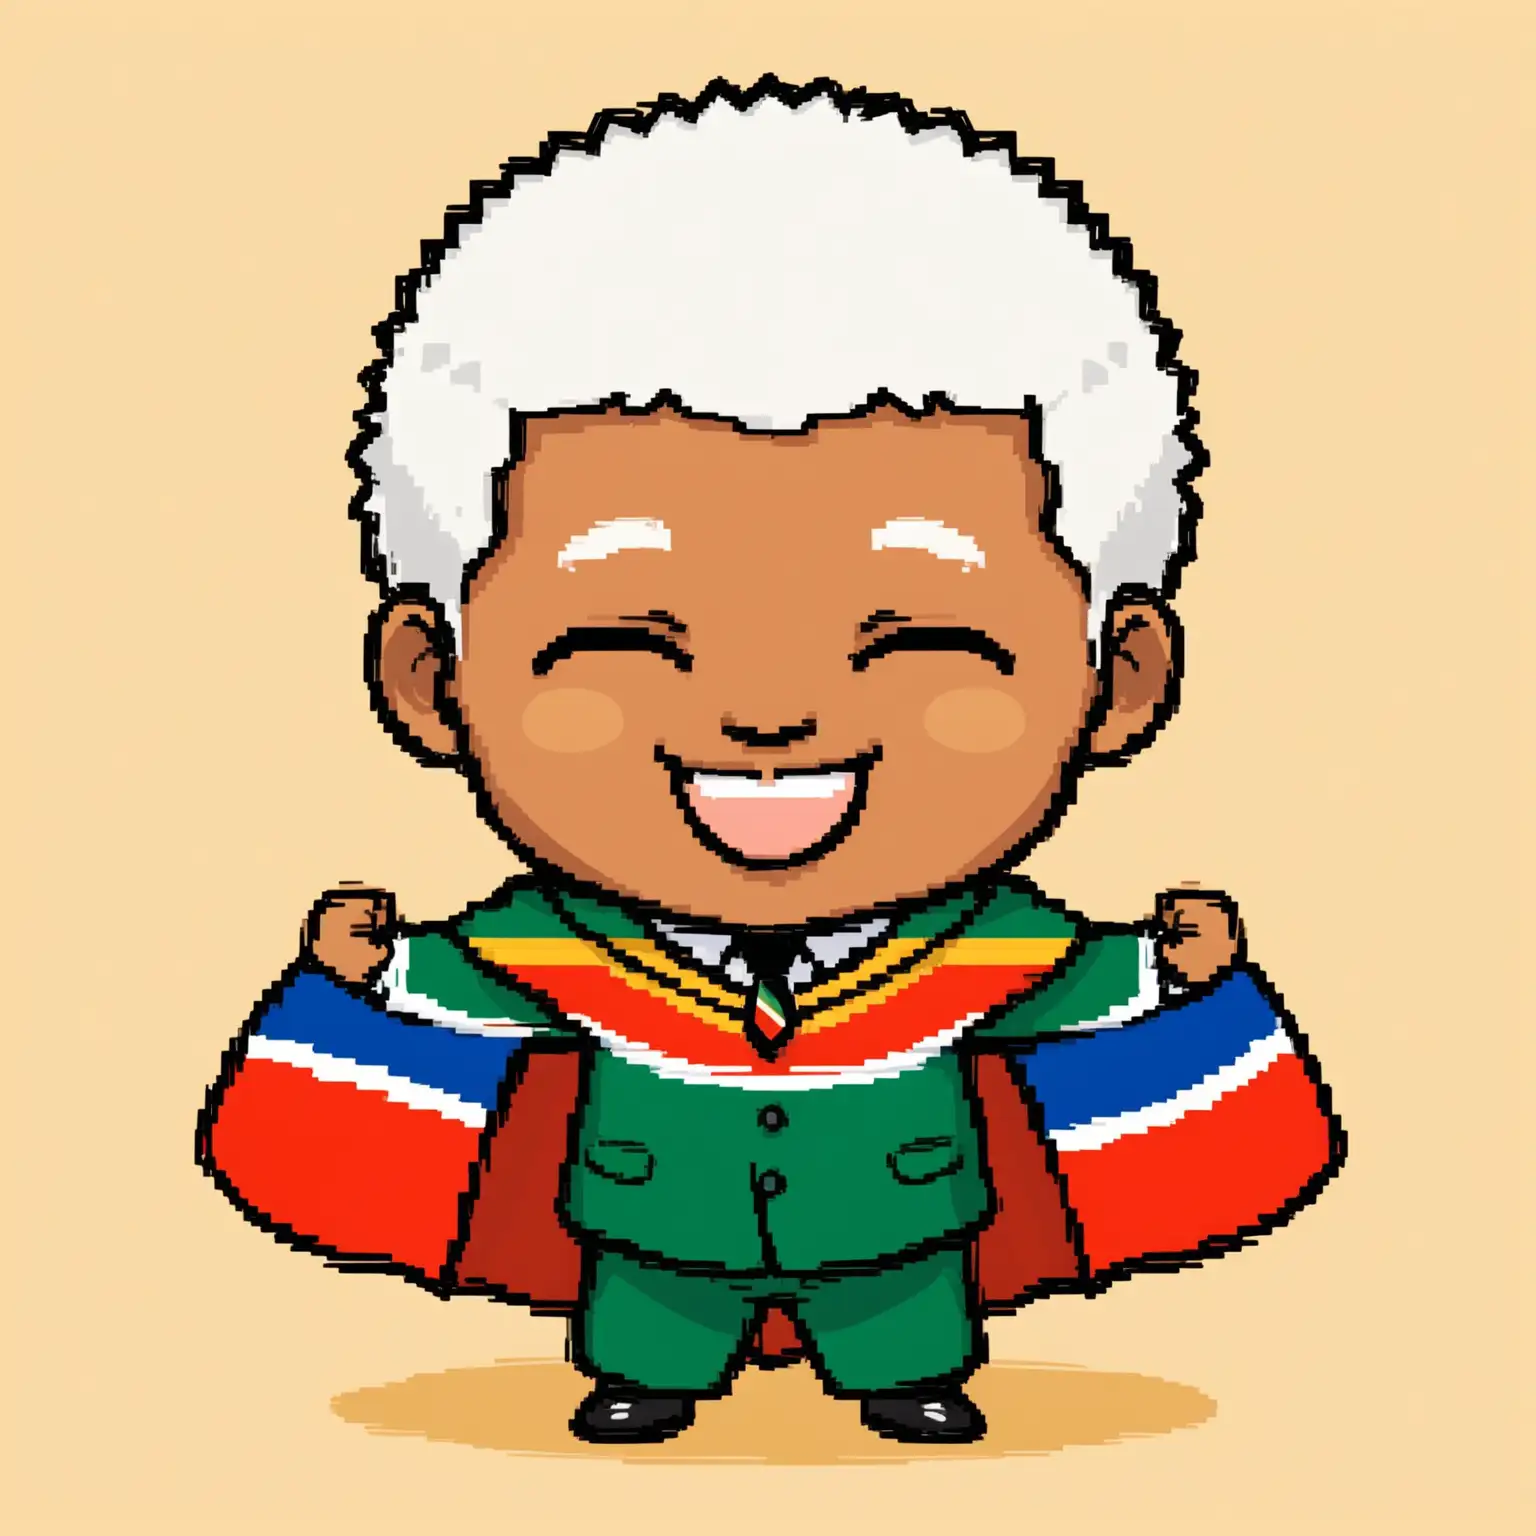 Chibi Nelson Mandela with South African Flag Cape and Raised Fists